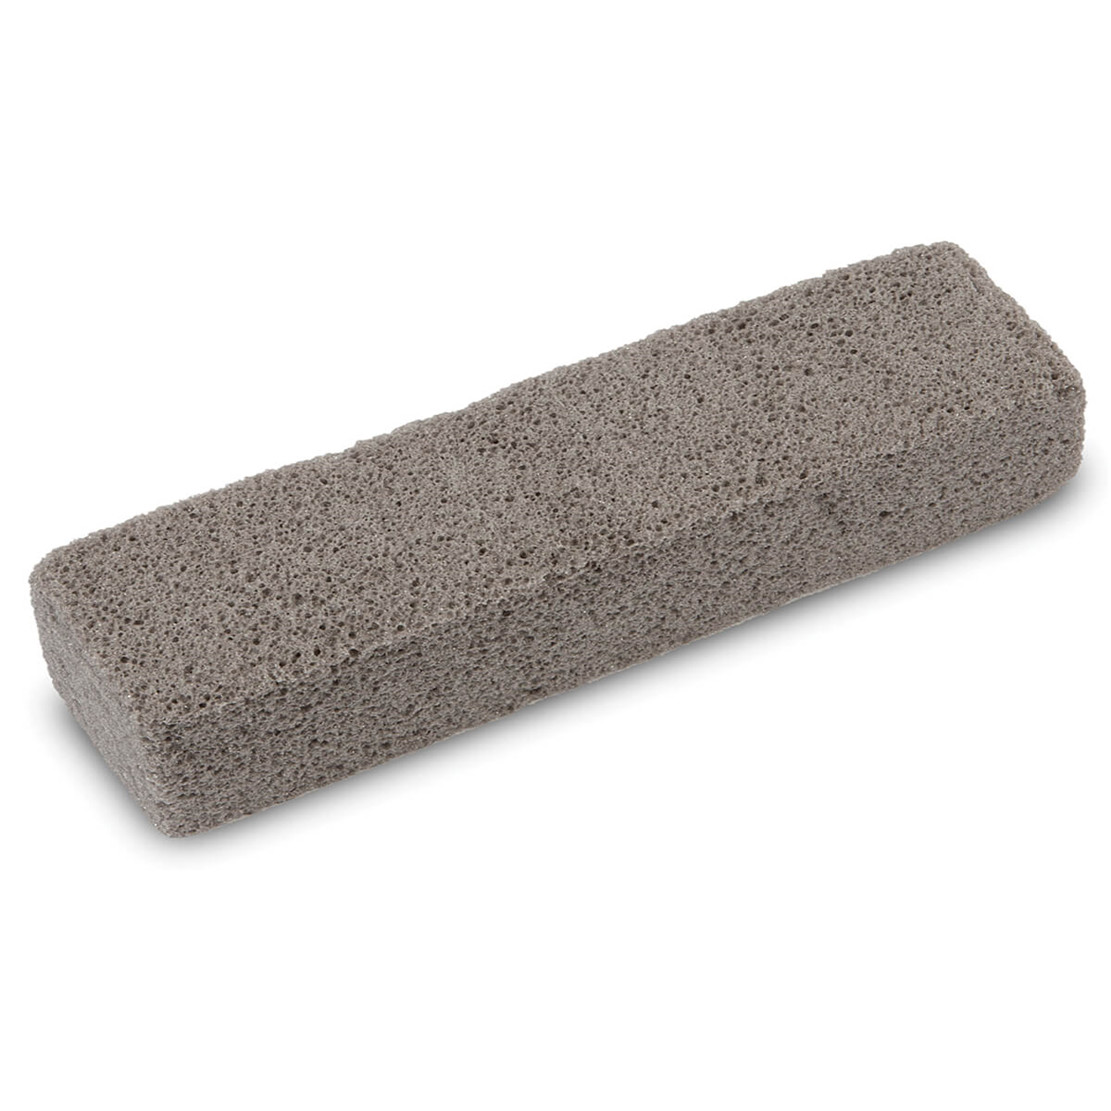 bathroom cleaning pumice stone without handle